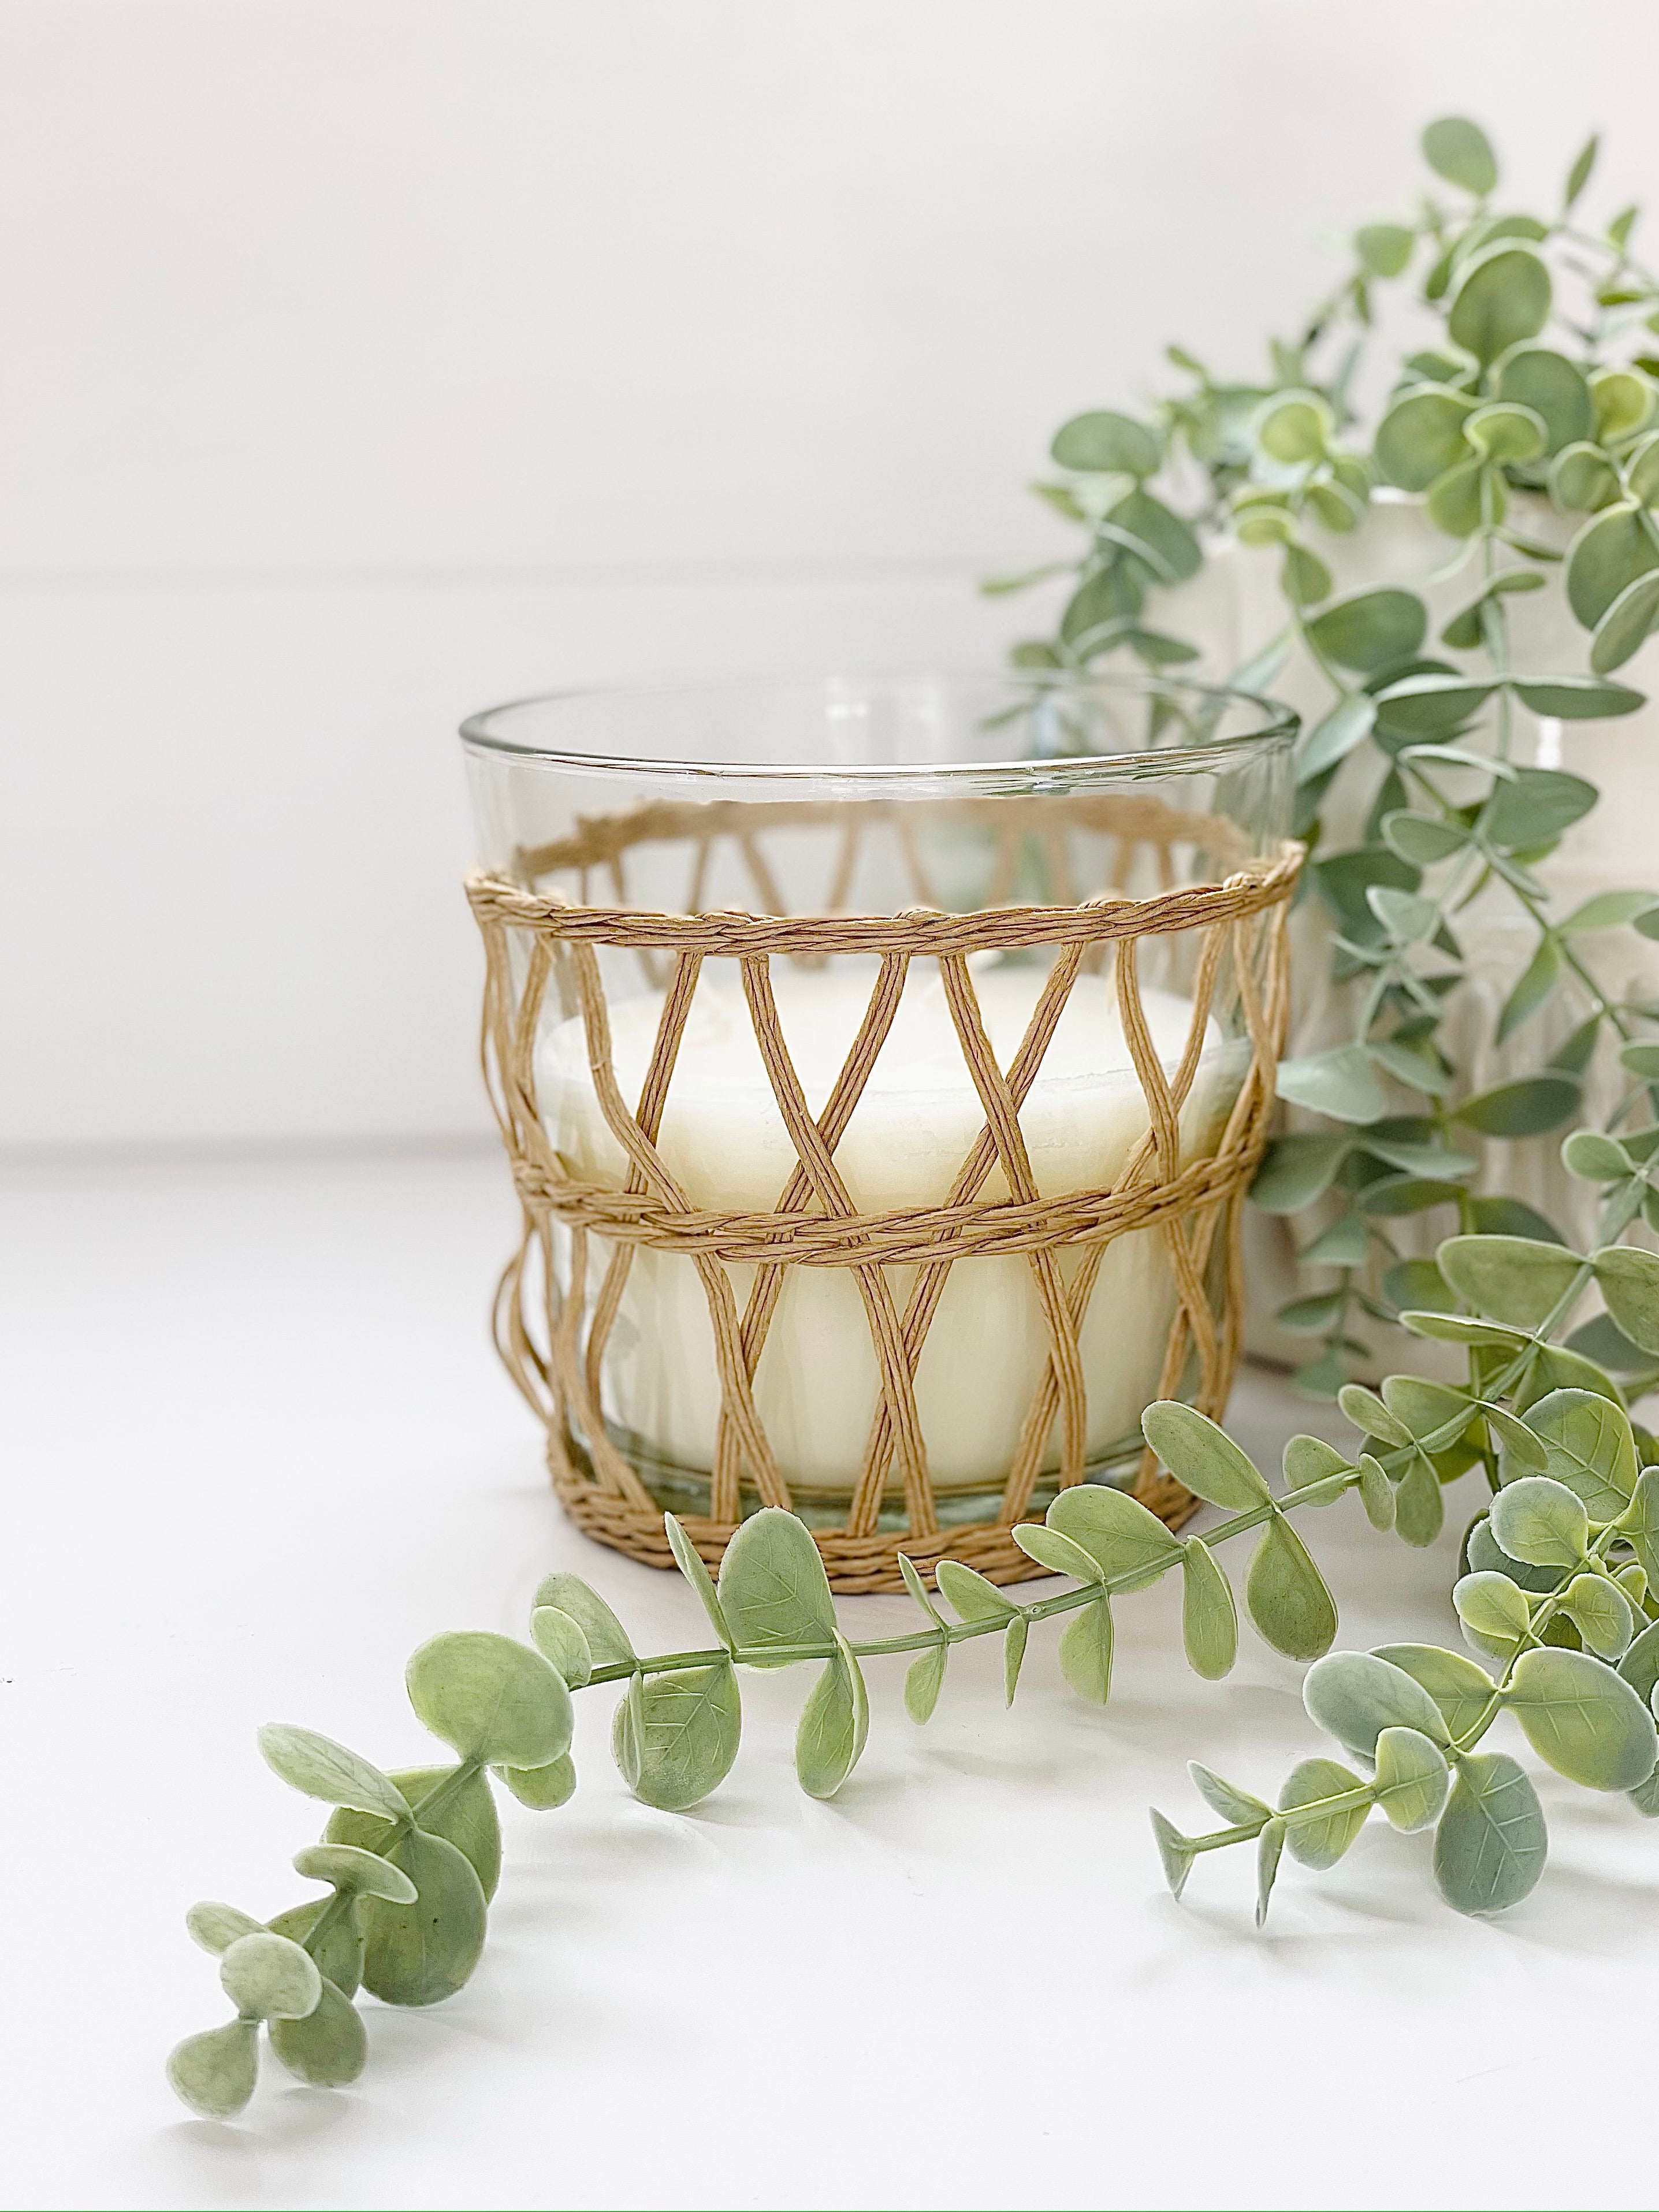 The Rattan candle